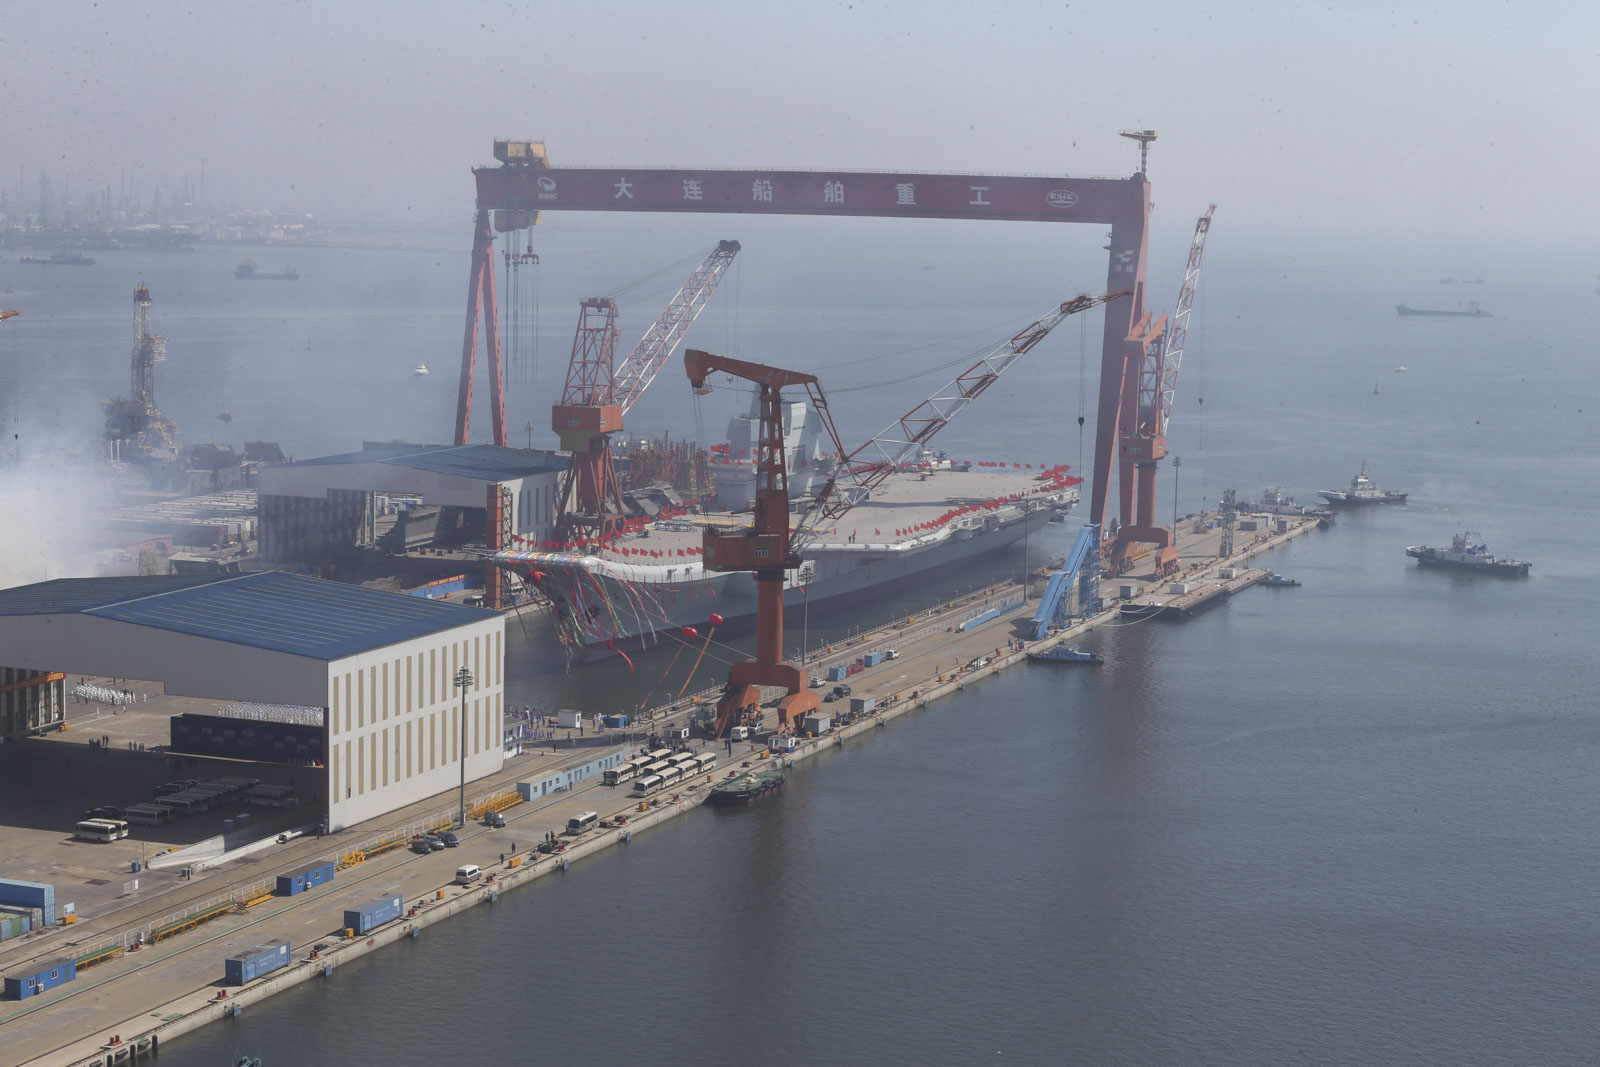 China's first homemade aircraft carrier Type 001A ready to enter the water